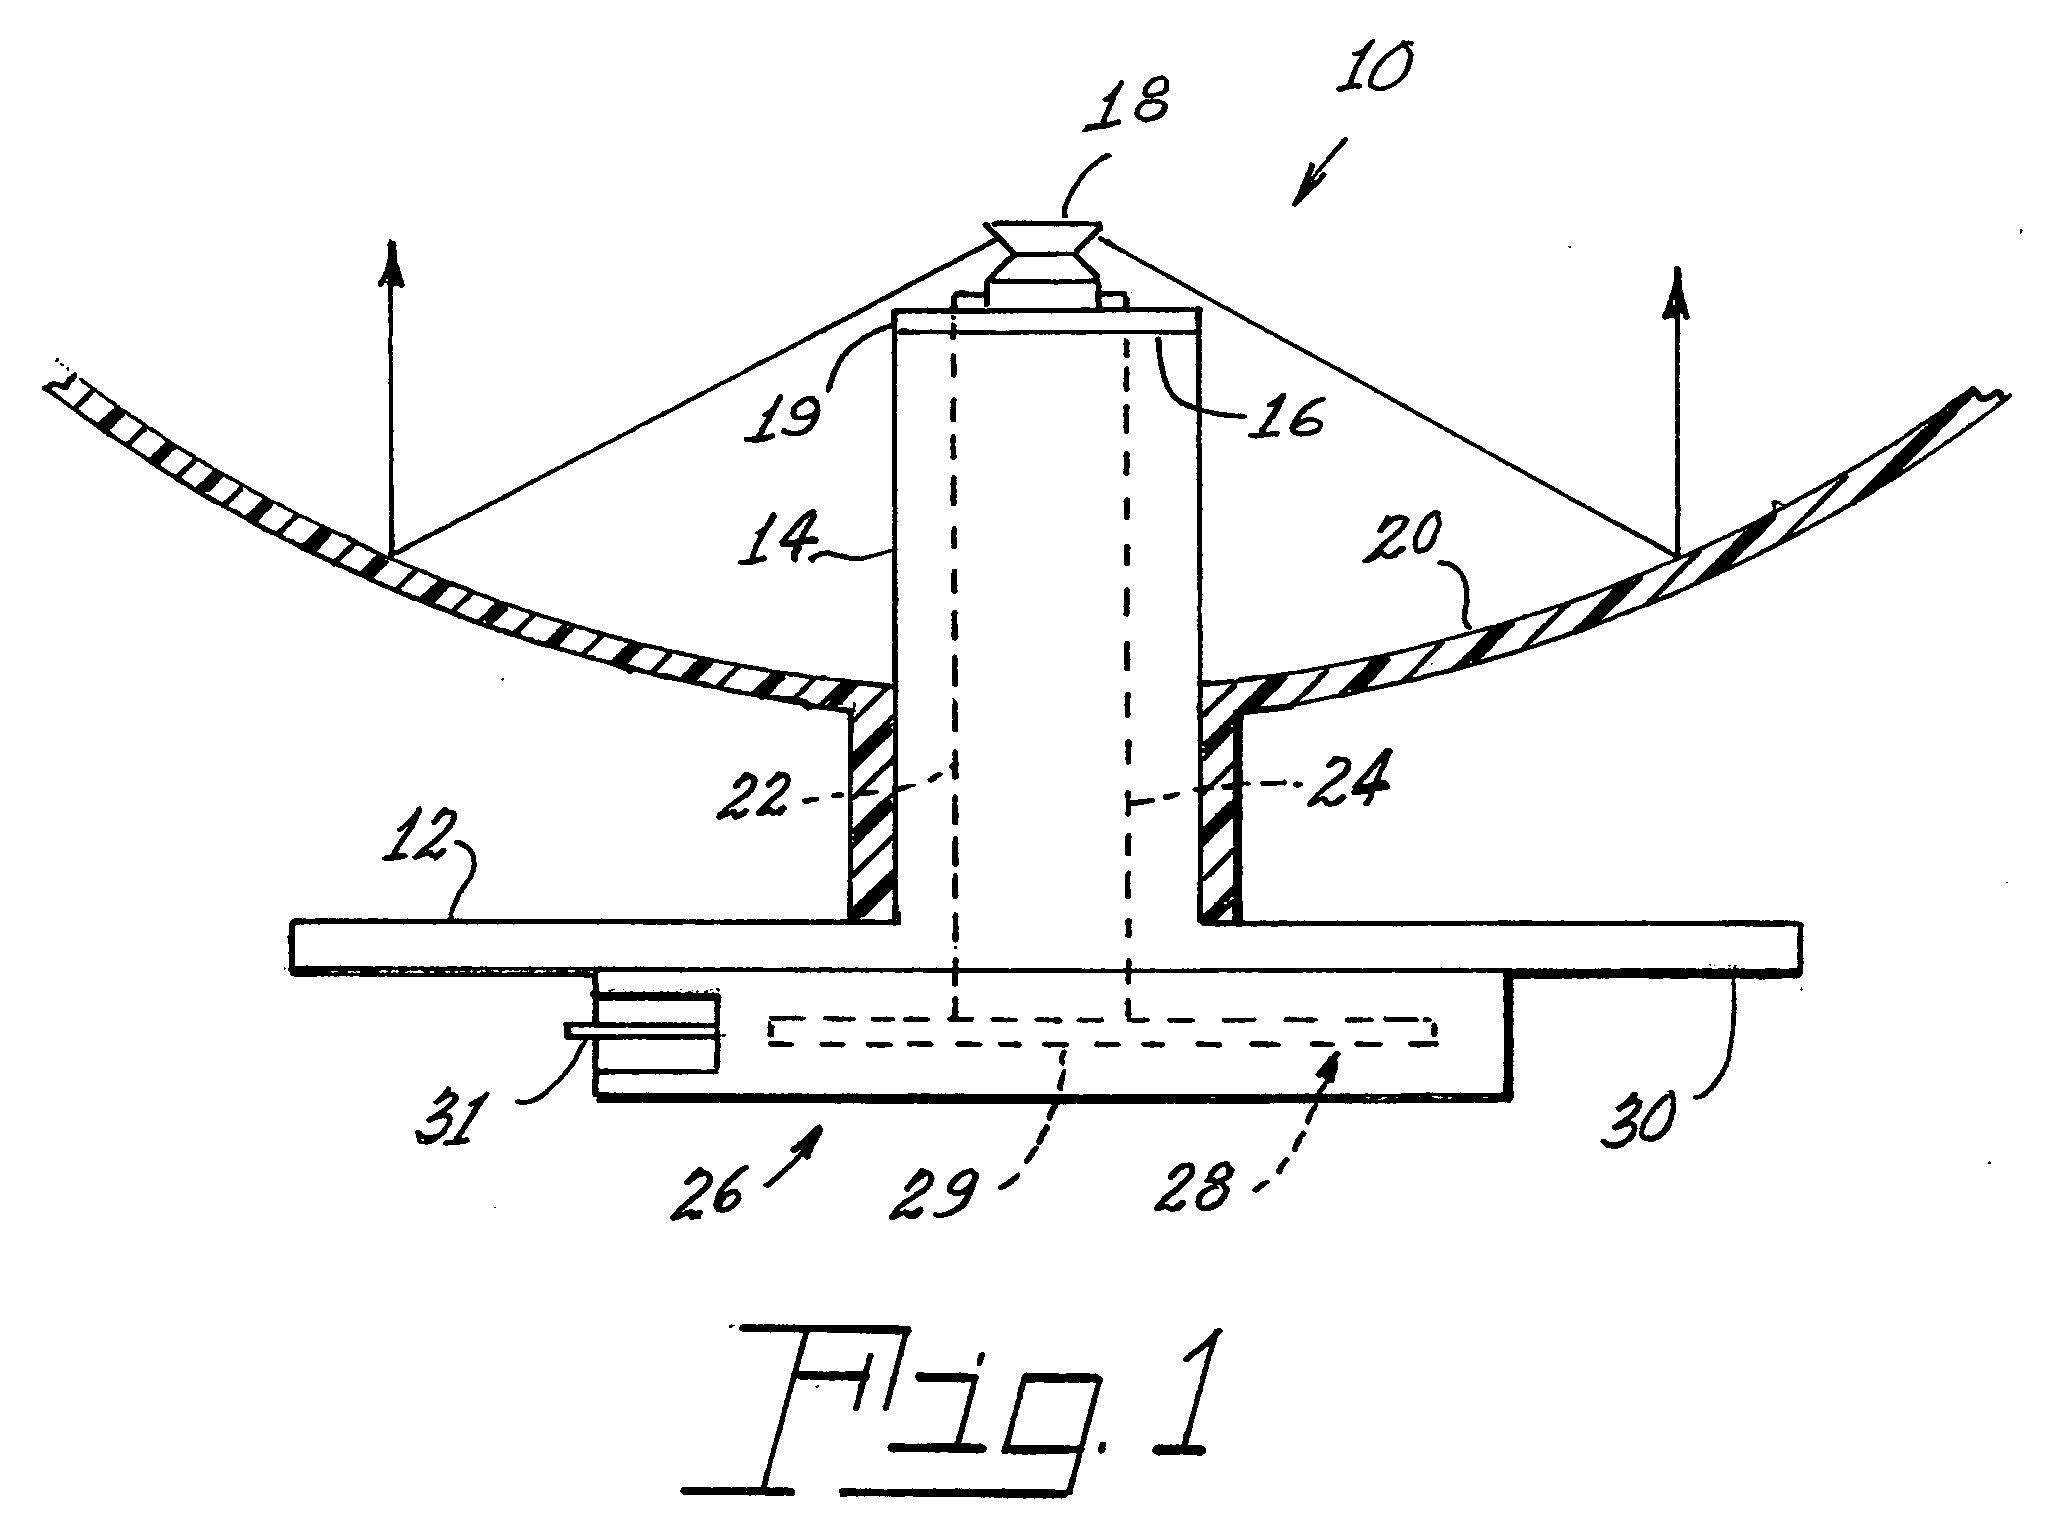 Molded-in light emitting diode light source